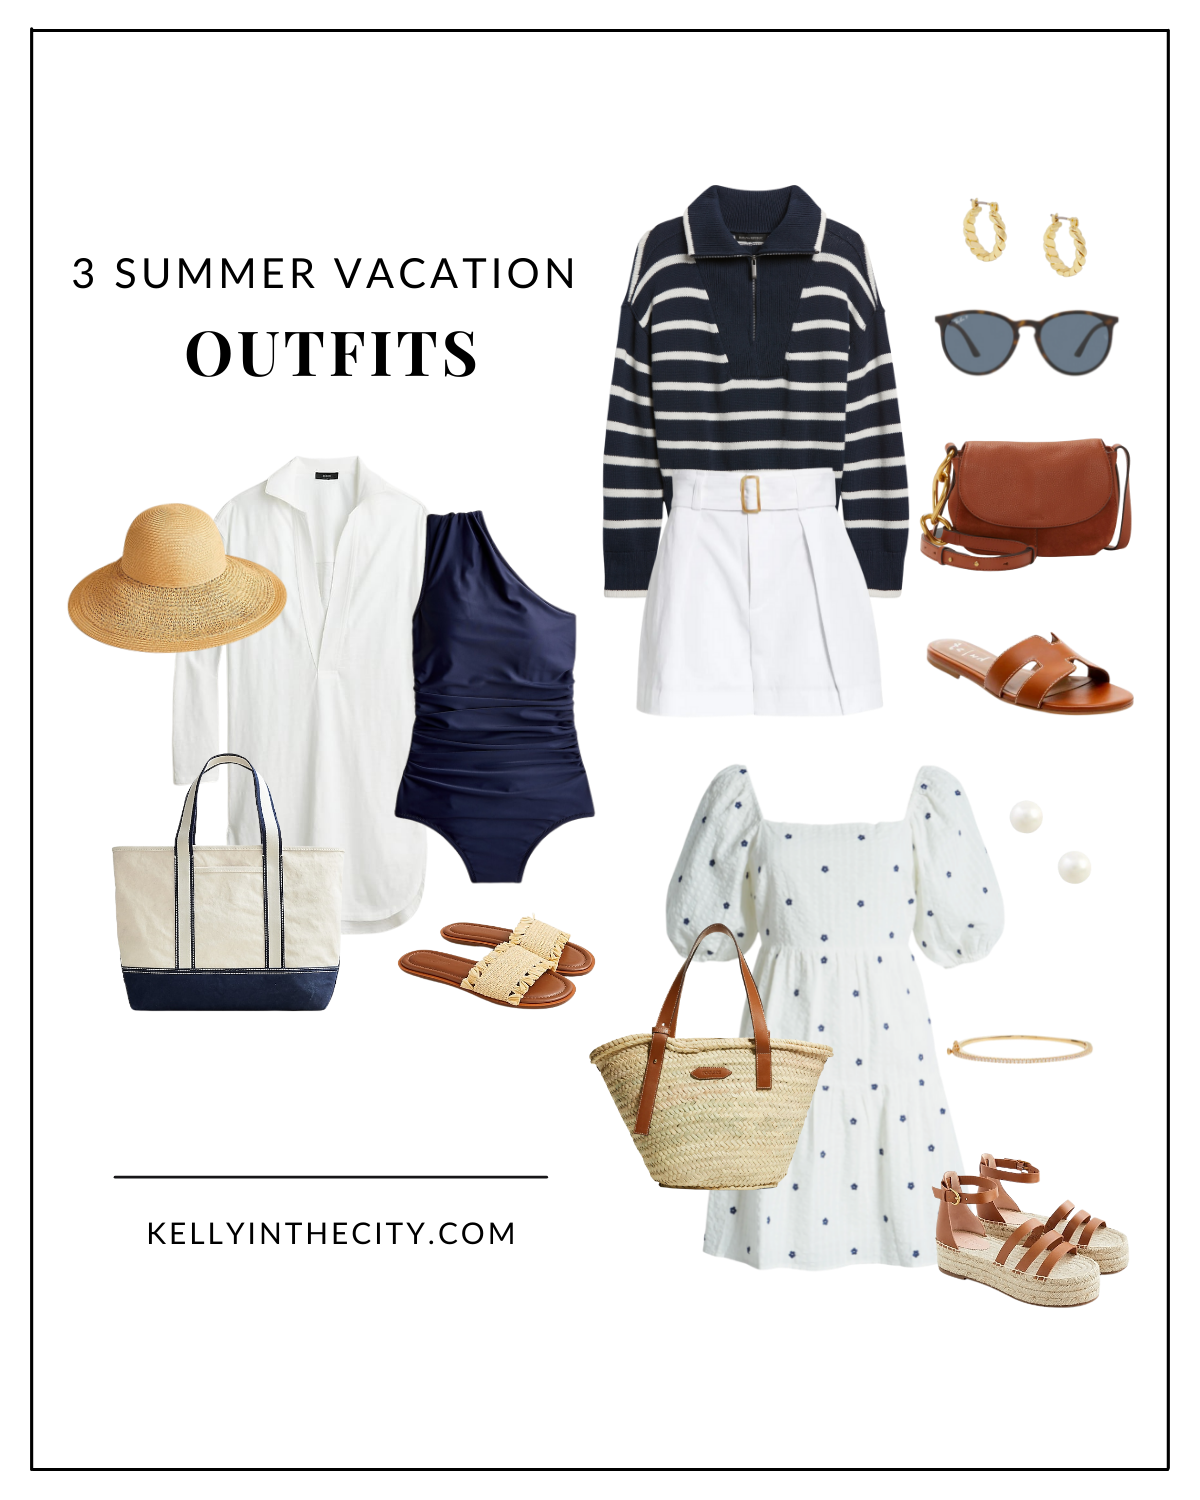 3 Summer Vacation Outfit Ideas - Kelly in the City | Lifestyle Blog